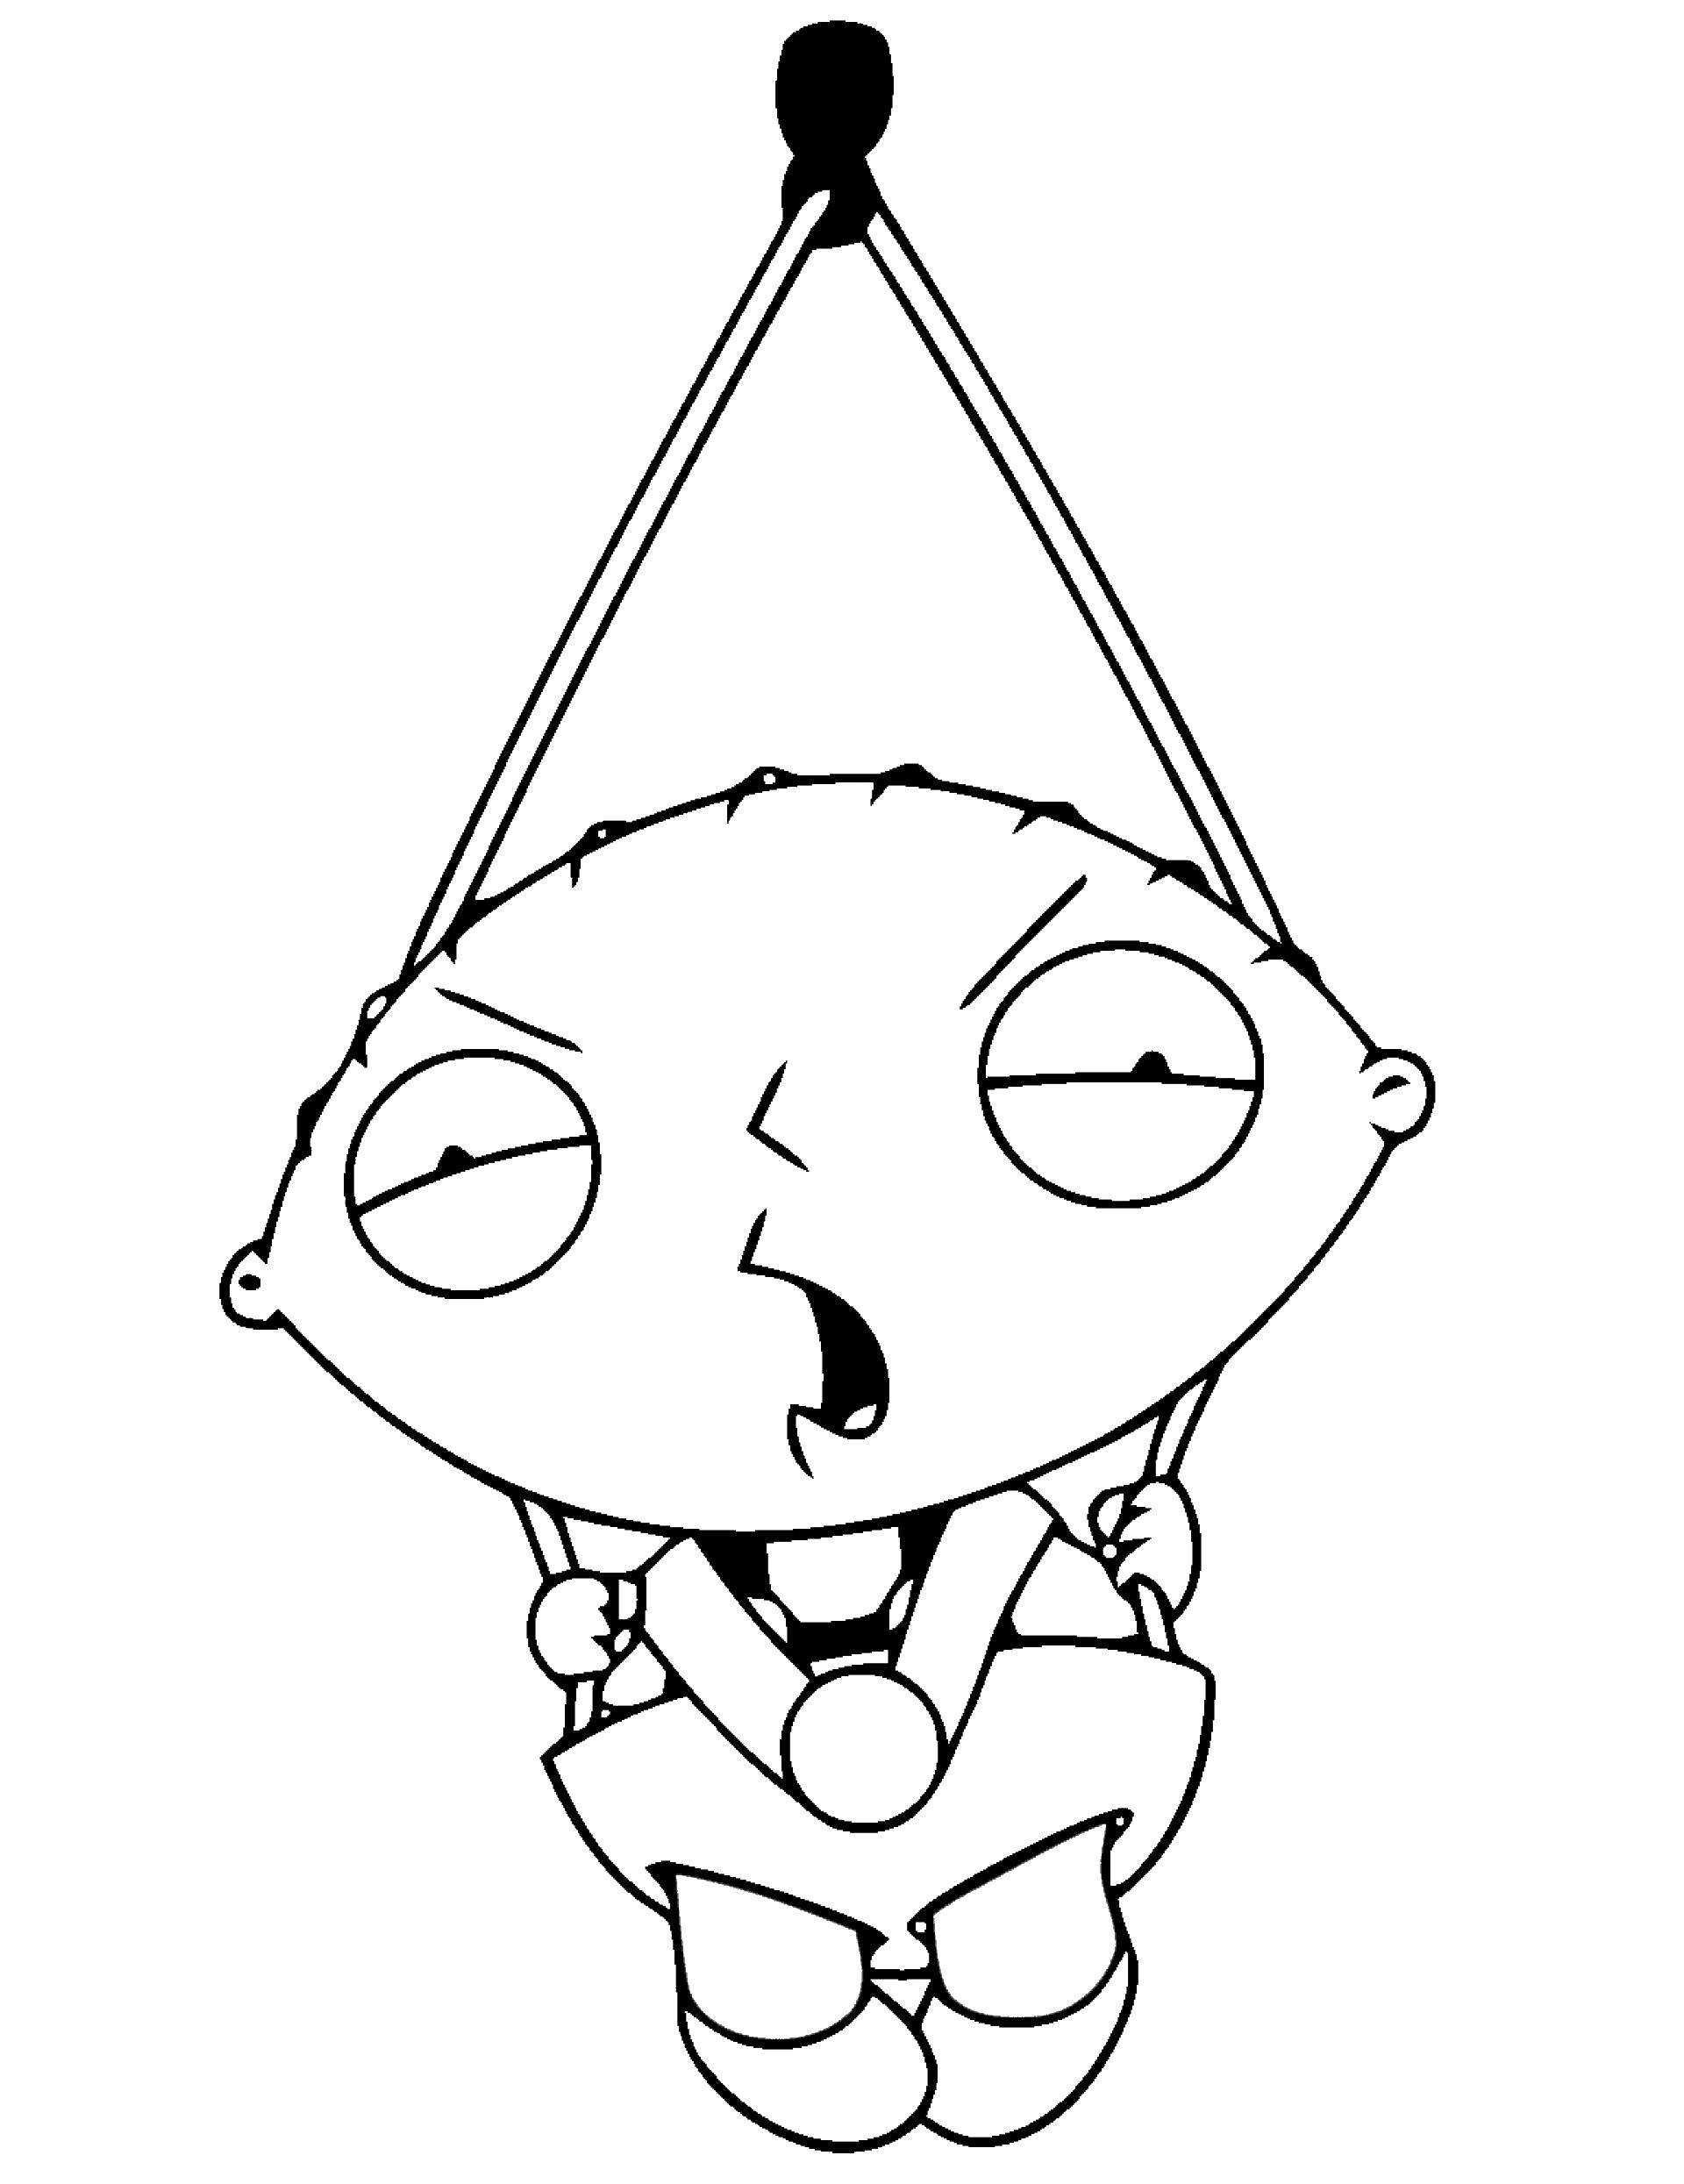 Coloring Stewie is angry. Category cartoons. Tags:  Family guy cartoon.